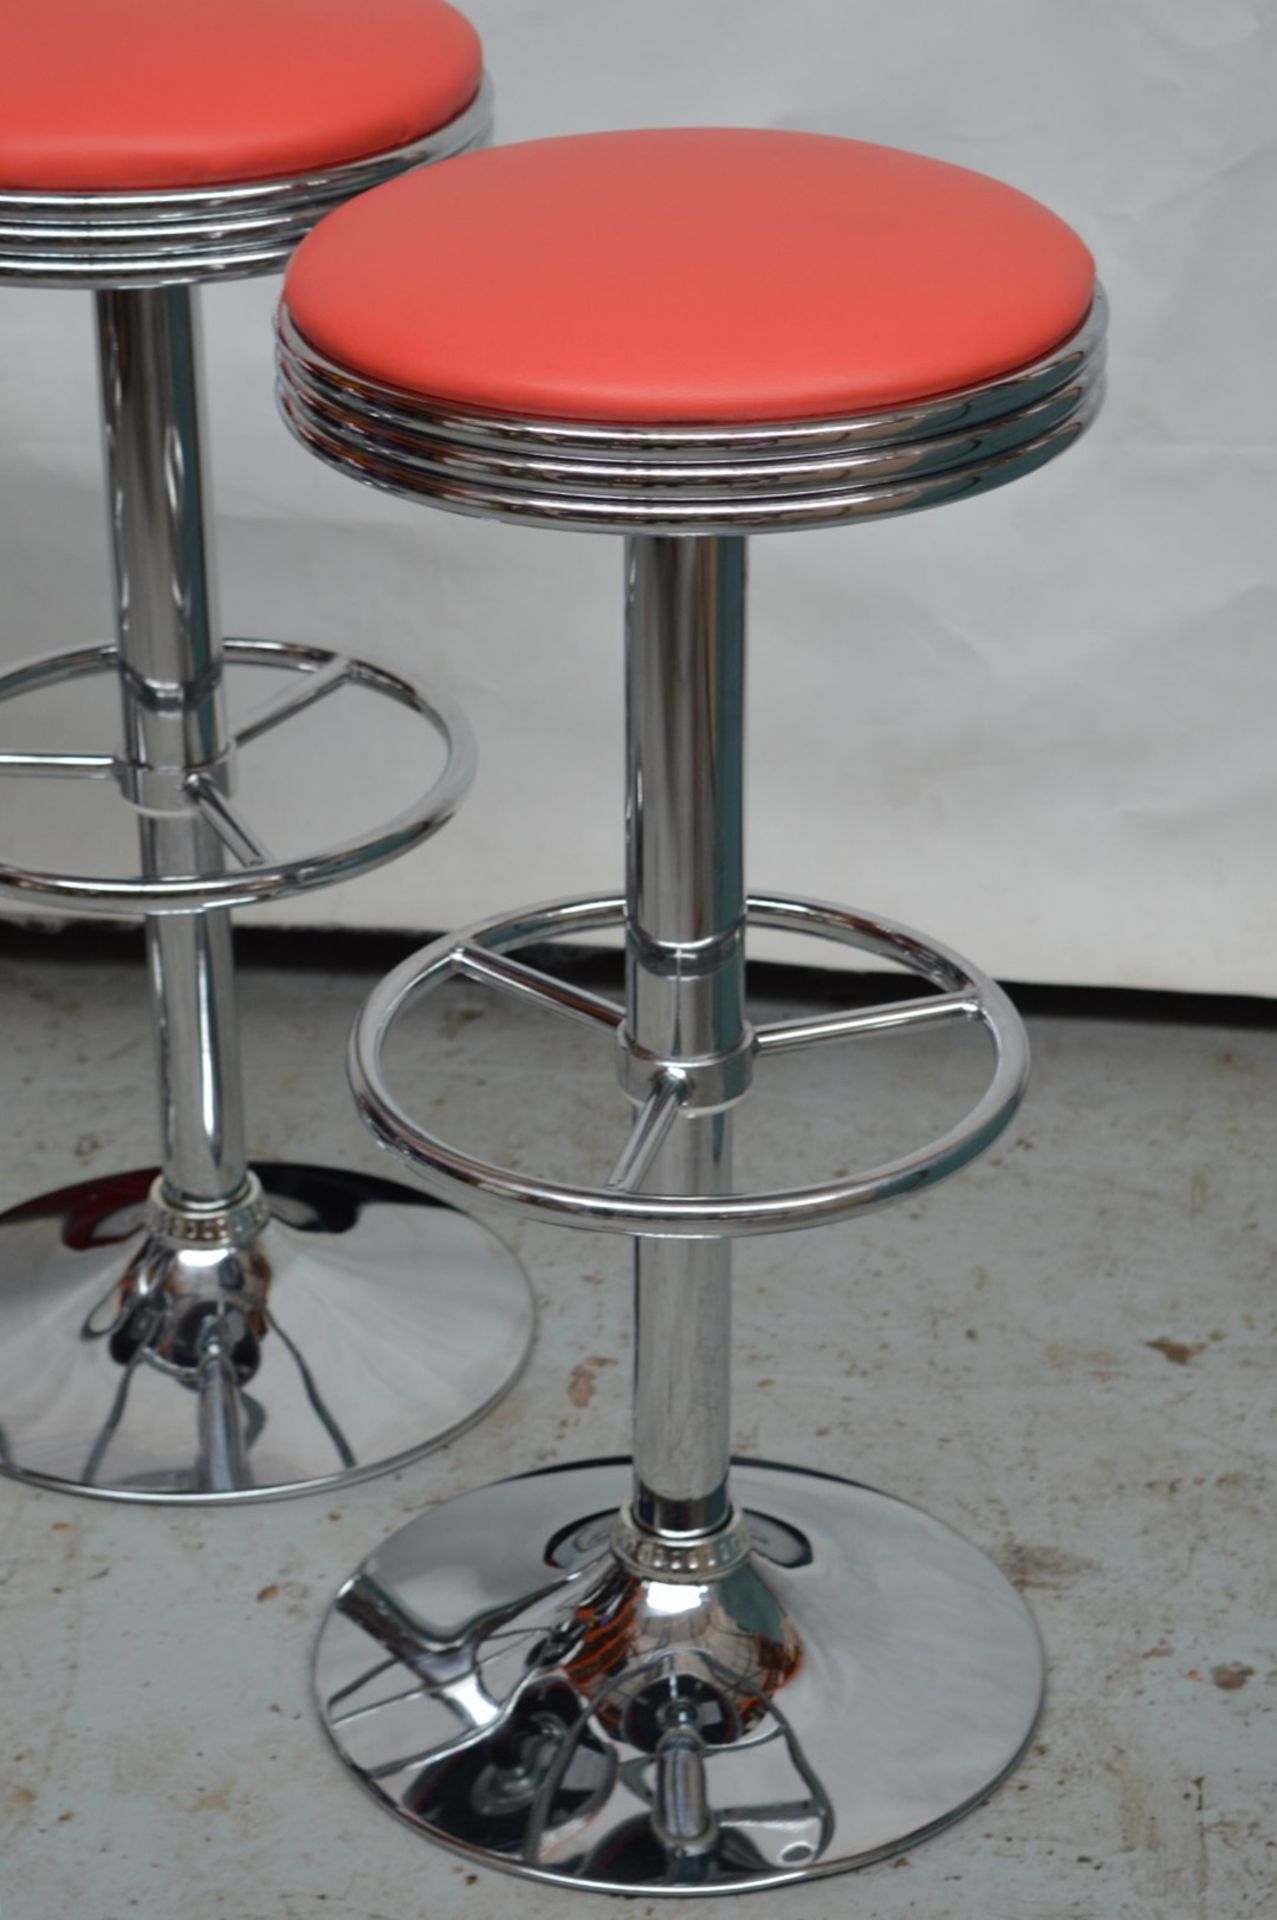 4 x Retro American Roadside Diner Themed Gas Lift Bar Stools - CL164 - Fantastic Stools With Full - Image 5 of 14